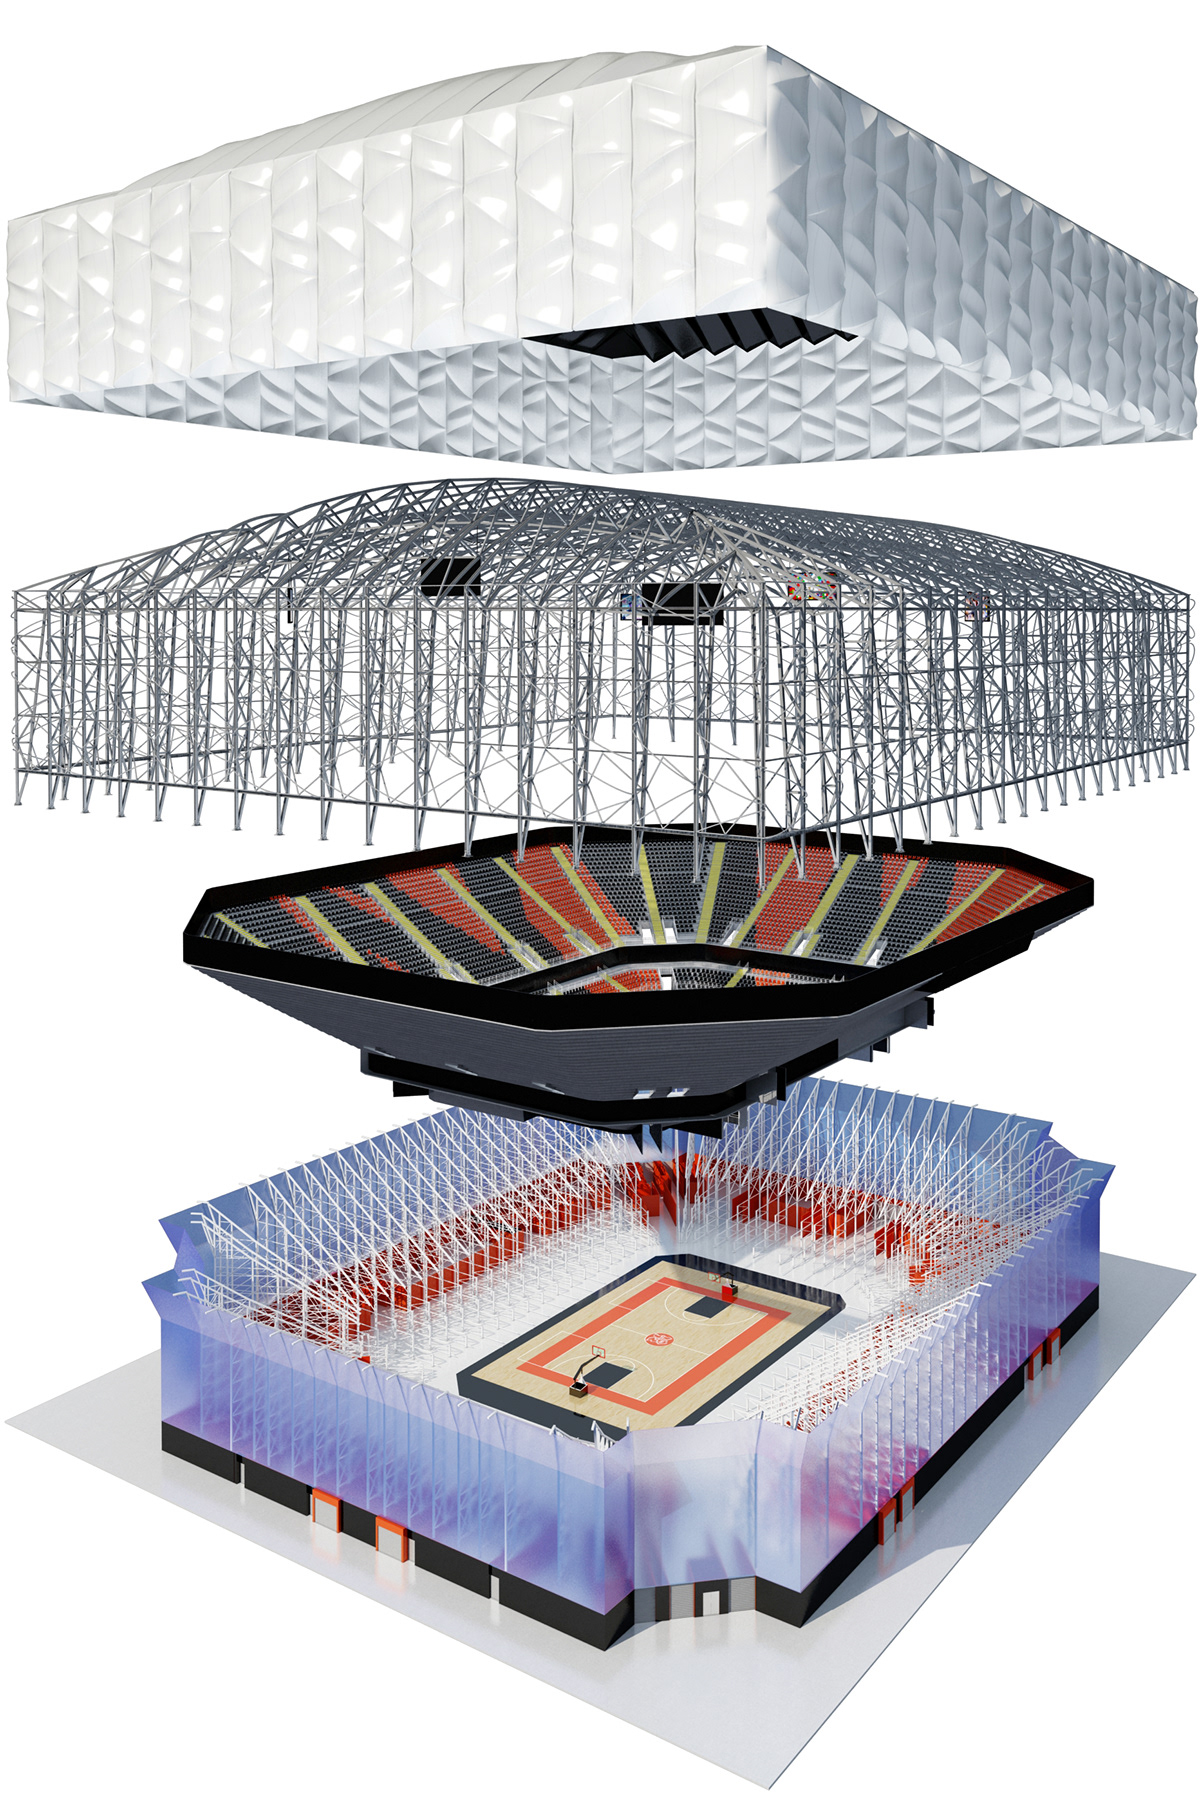 London 2012 BASKETBALL ARENA LONDON 3D OLYMPIC VENUES OLYMPIC GAMES INFOGRAPHIC